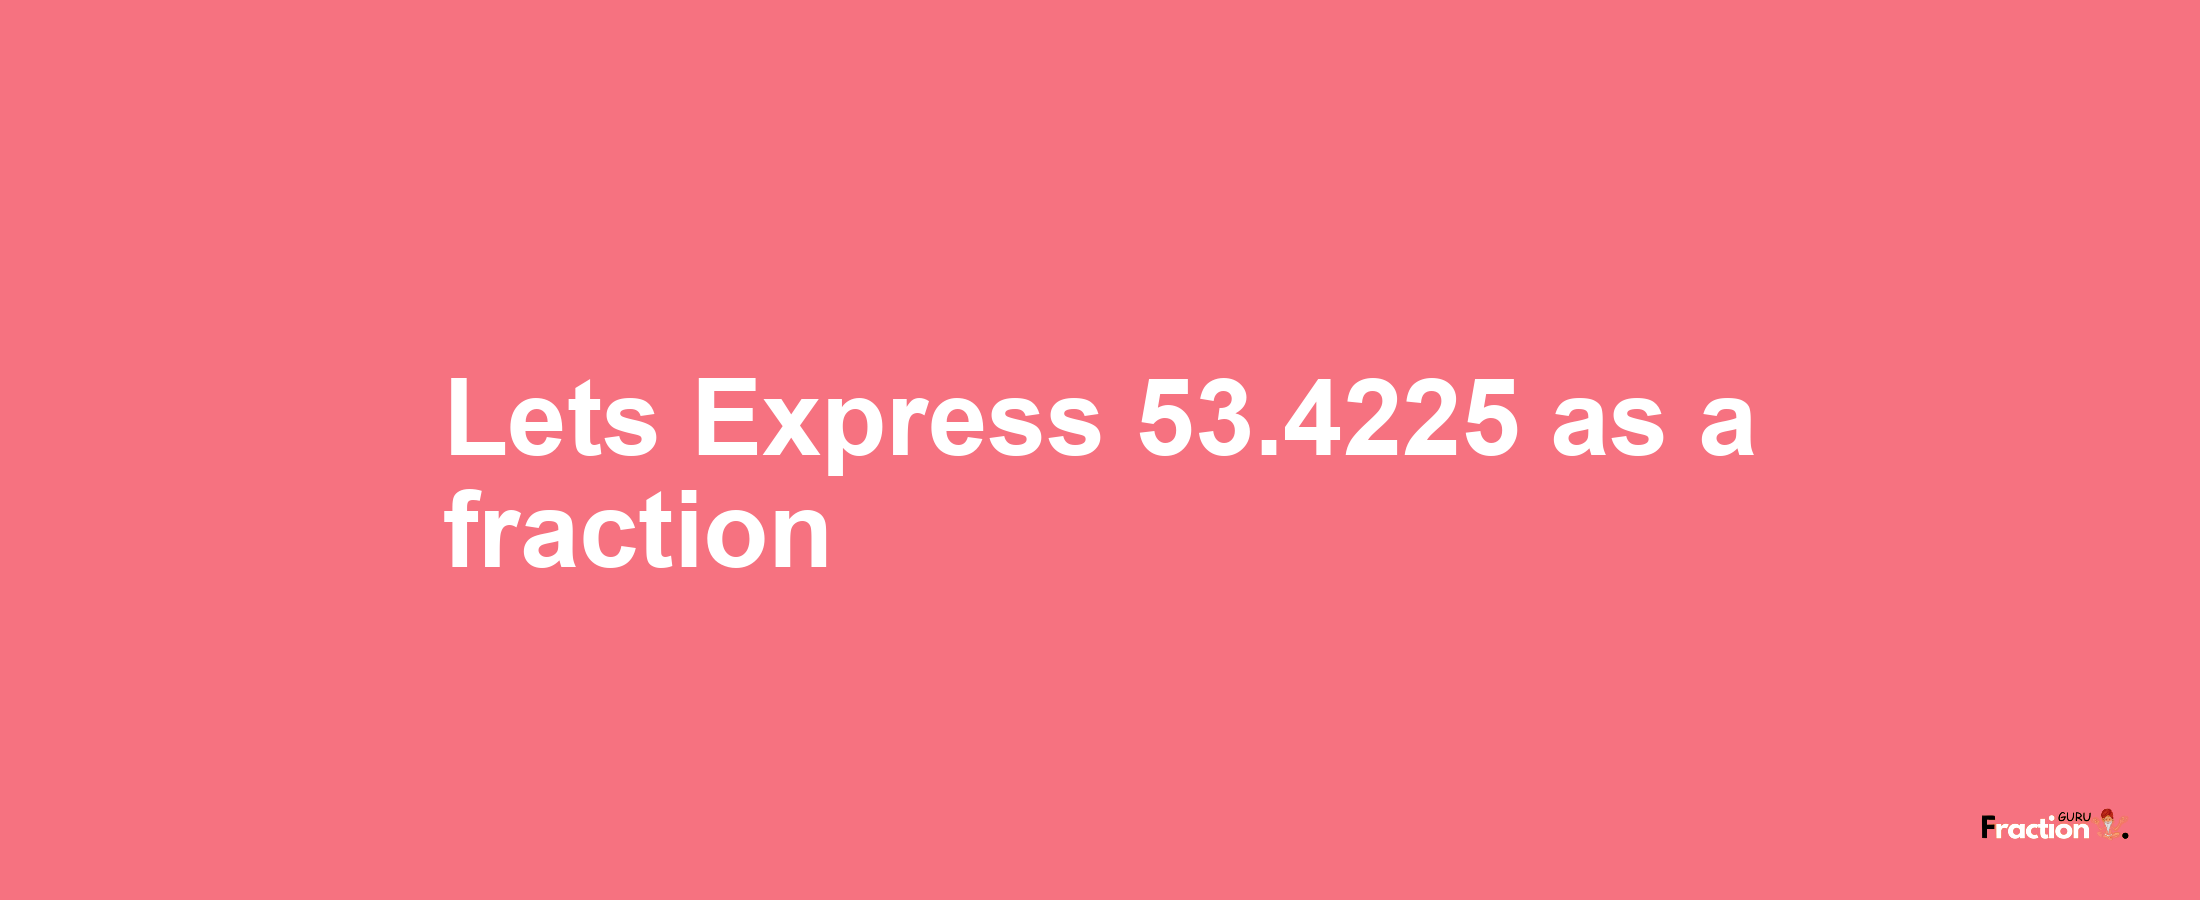 Lets Express 53.4225 as afraction